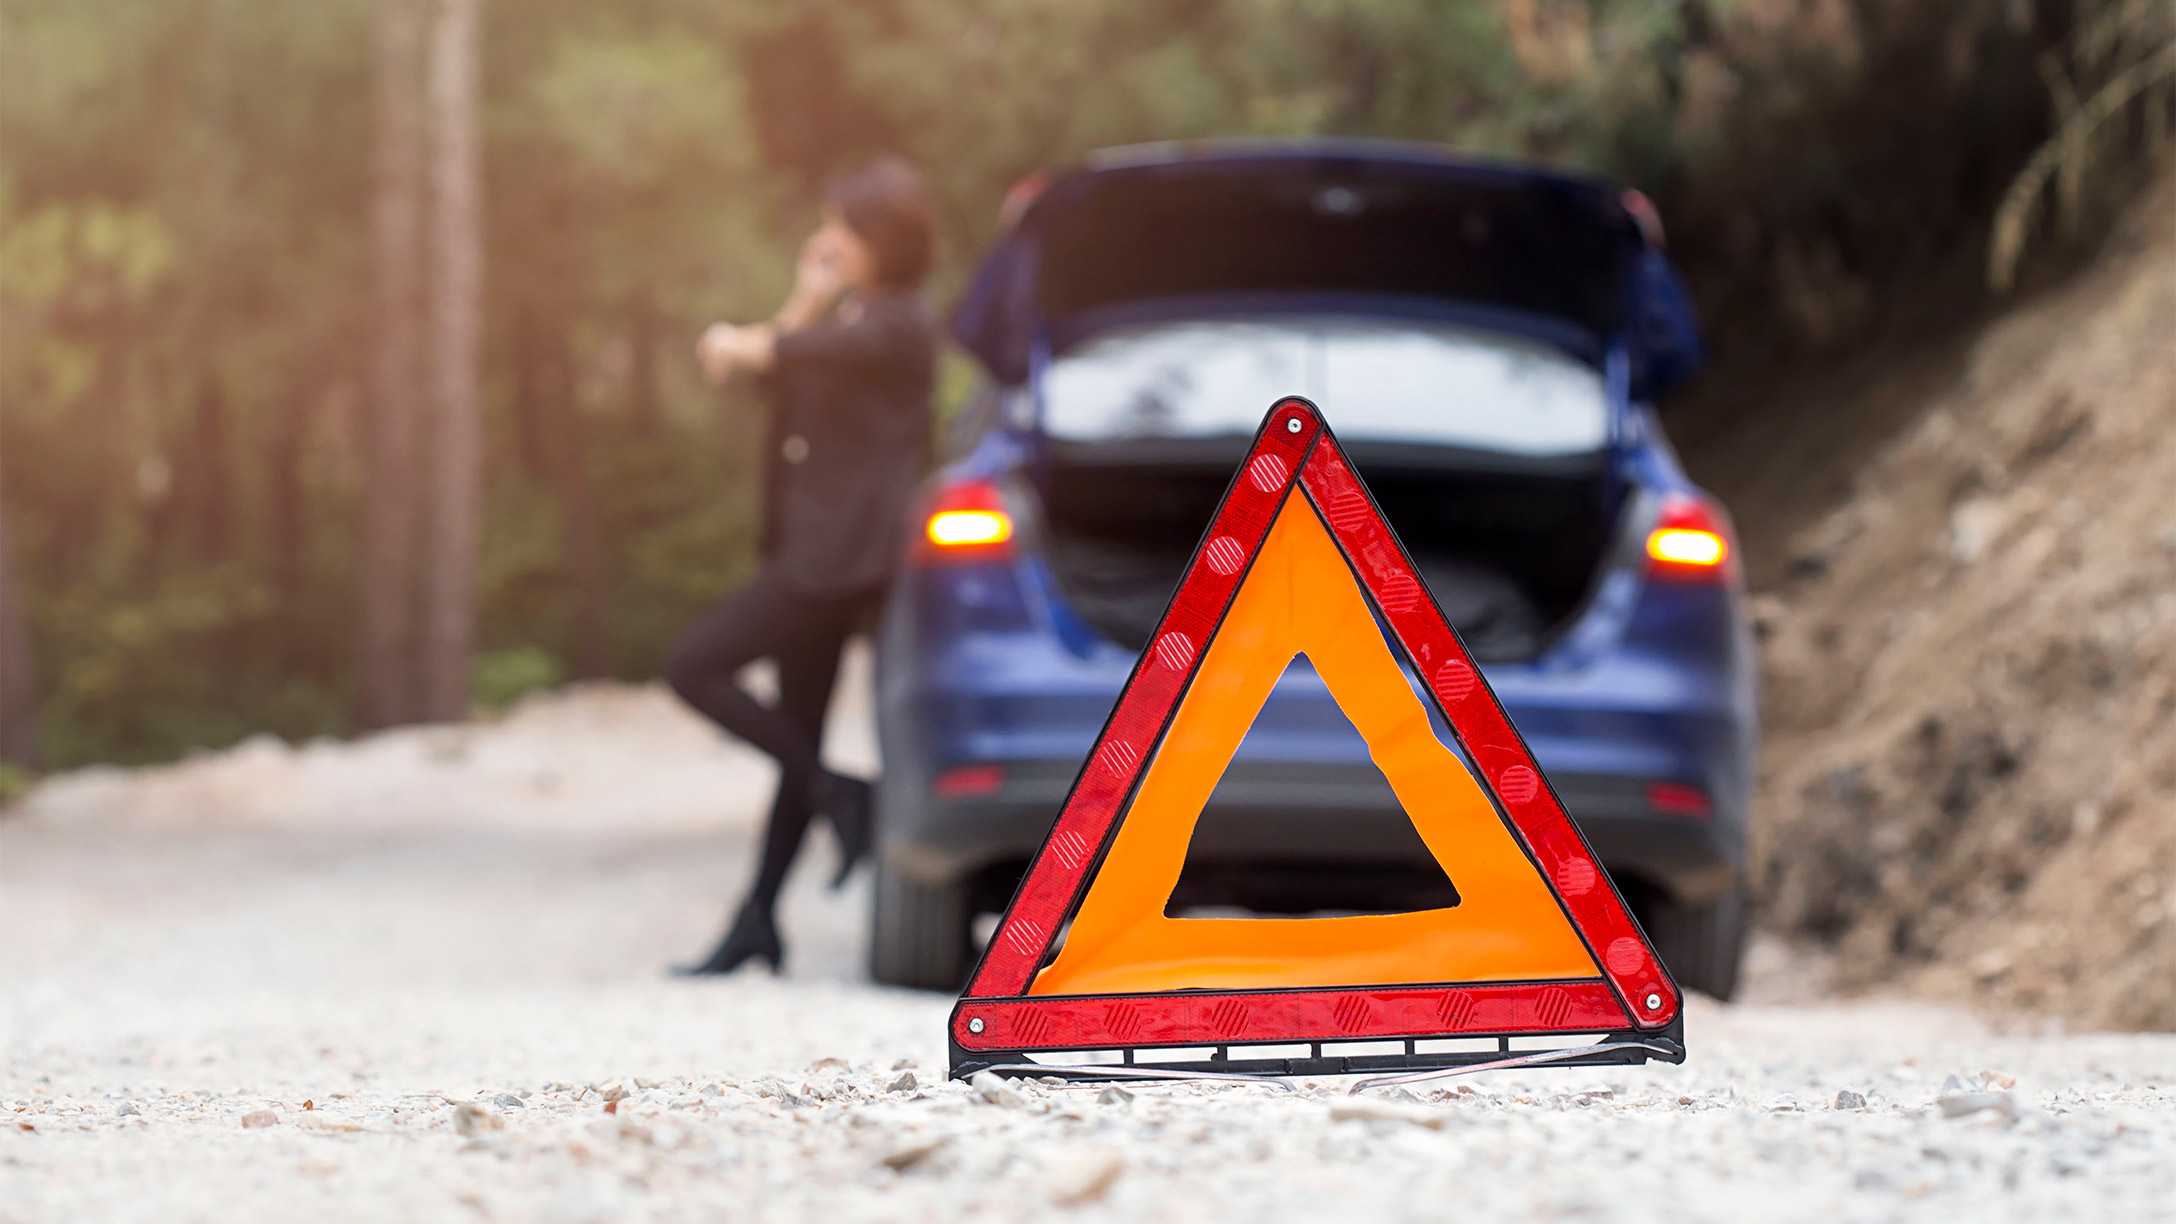 A woman standing against a broken down vehicle with a warning cone in the foreground